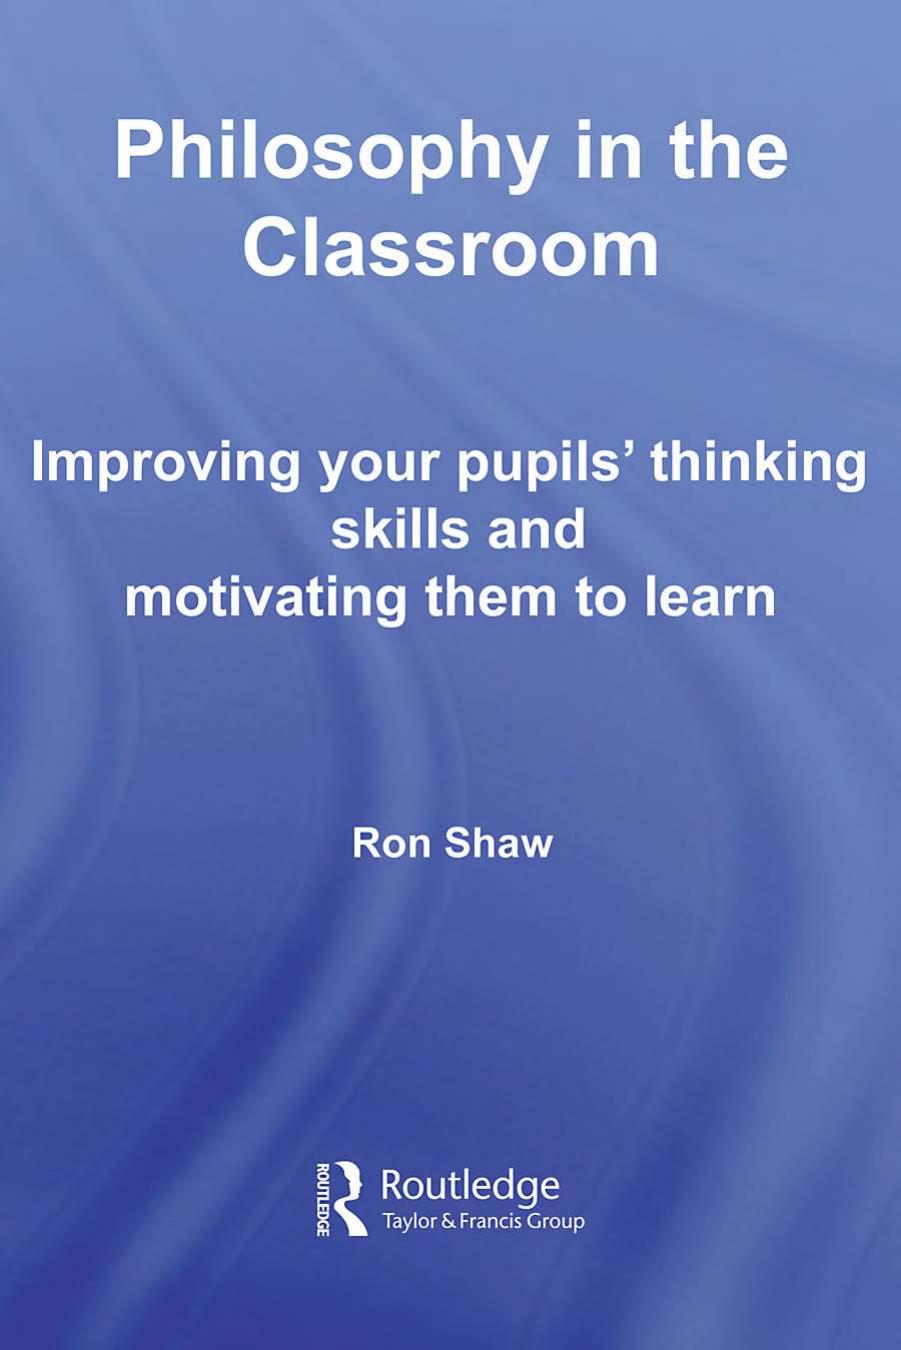 Philosophy in the Classroom: Improving Your Pupils' Thinking Skills and Motivating Them to Learn